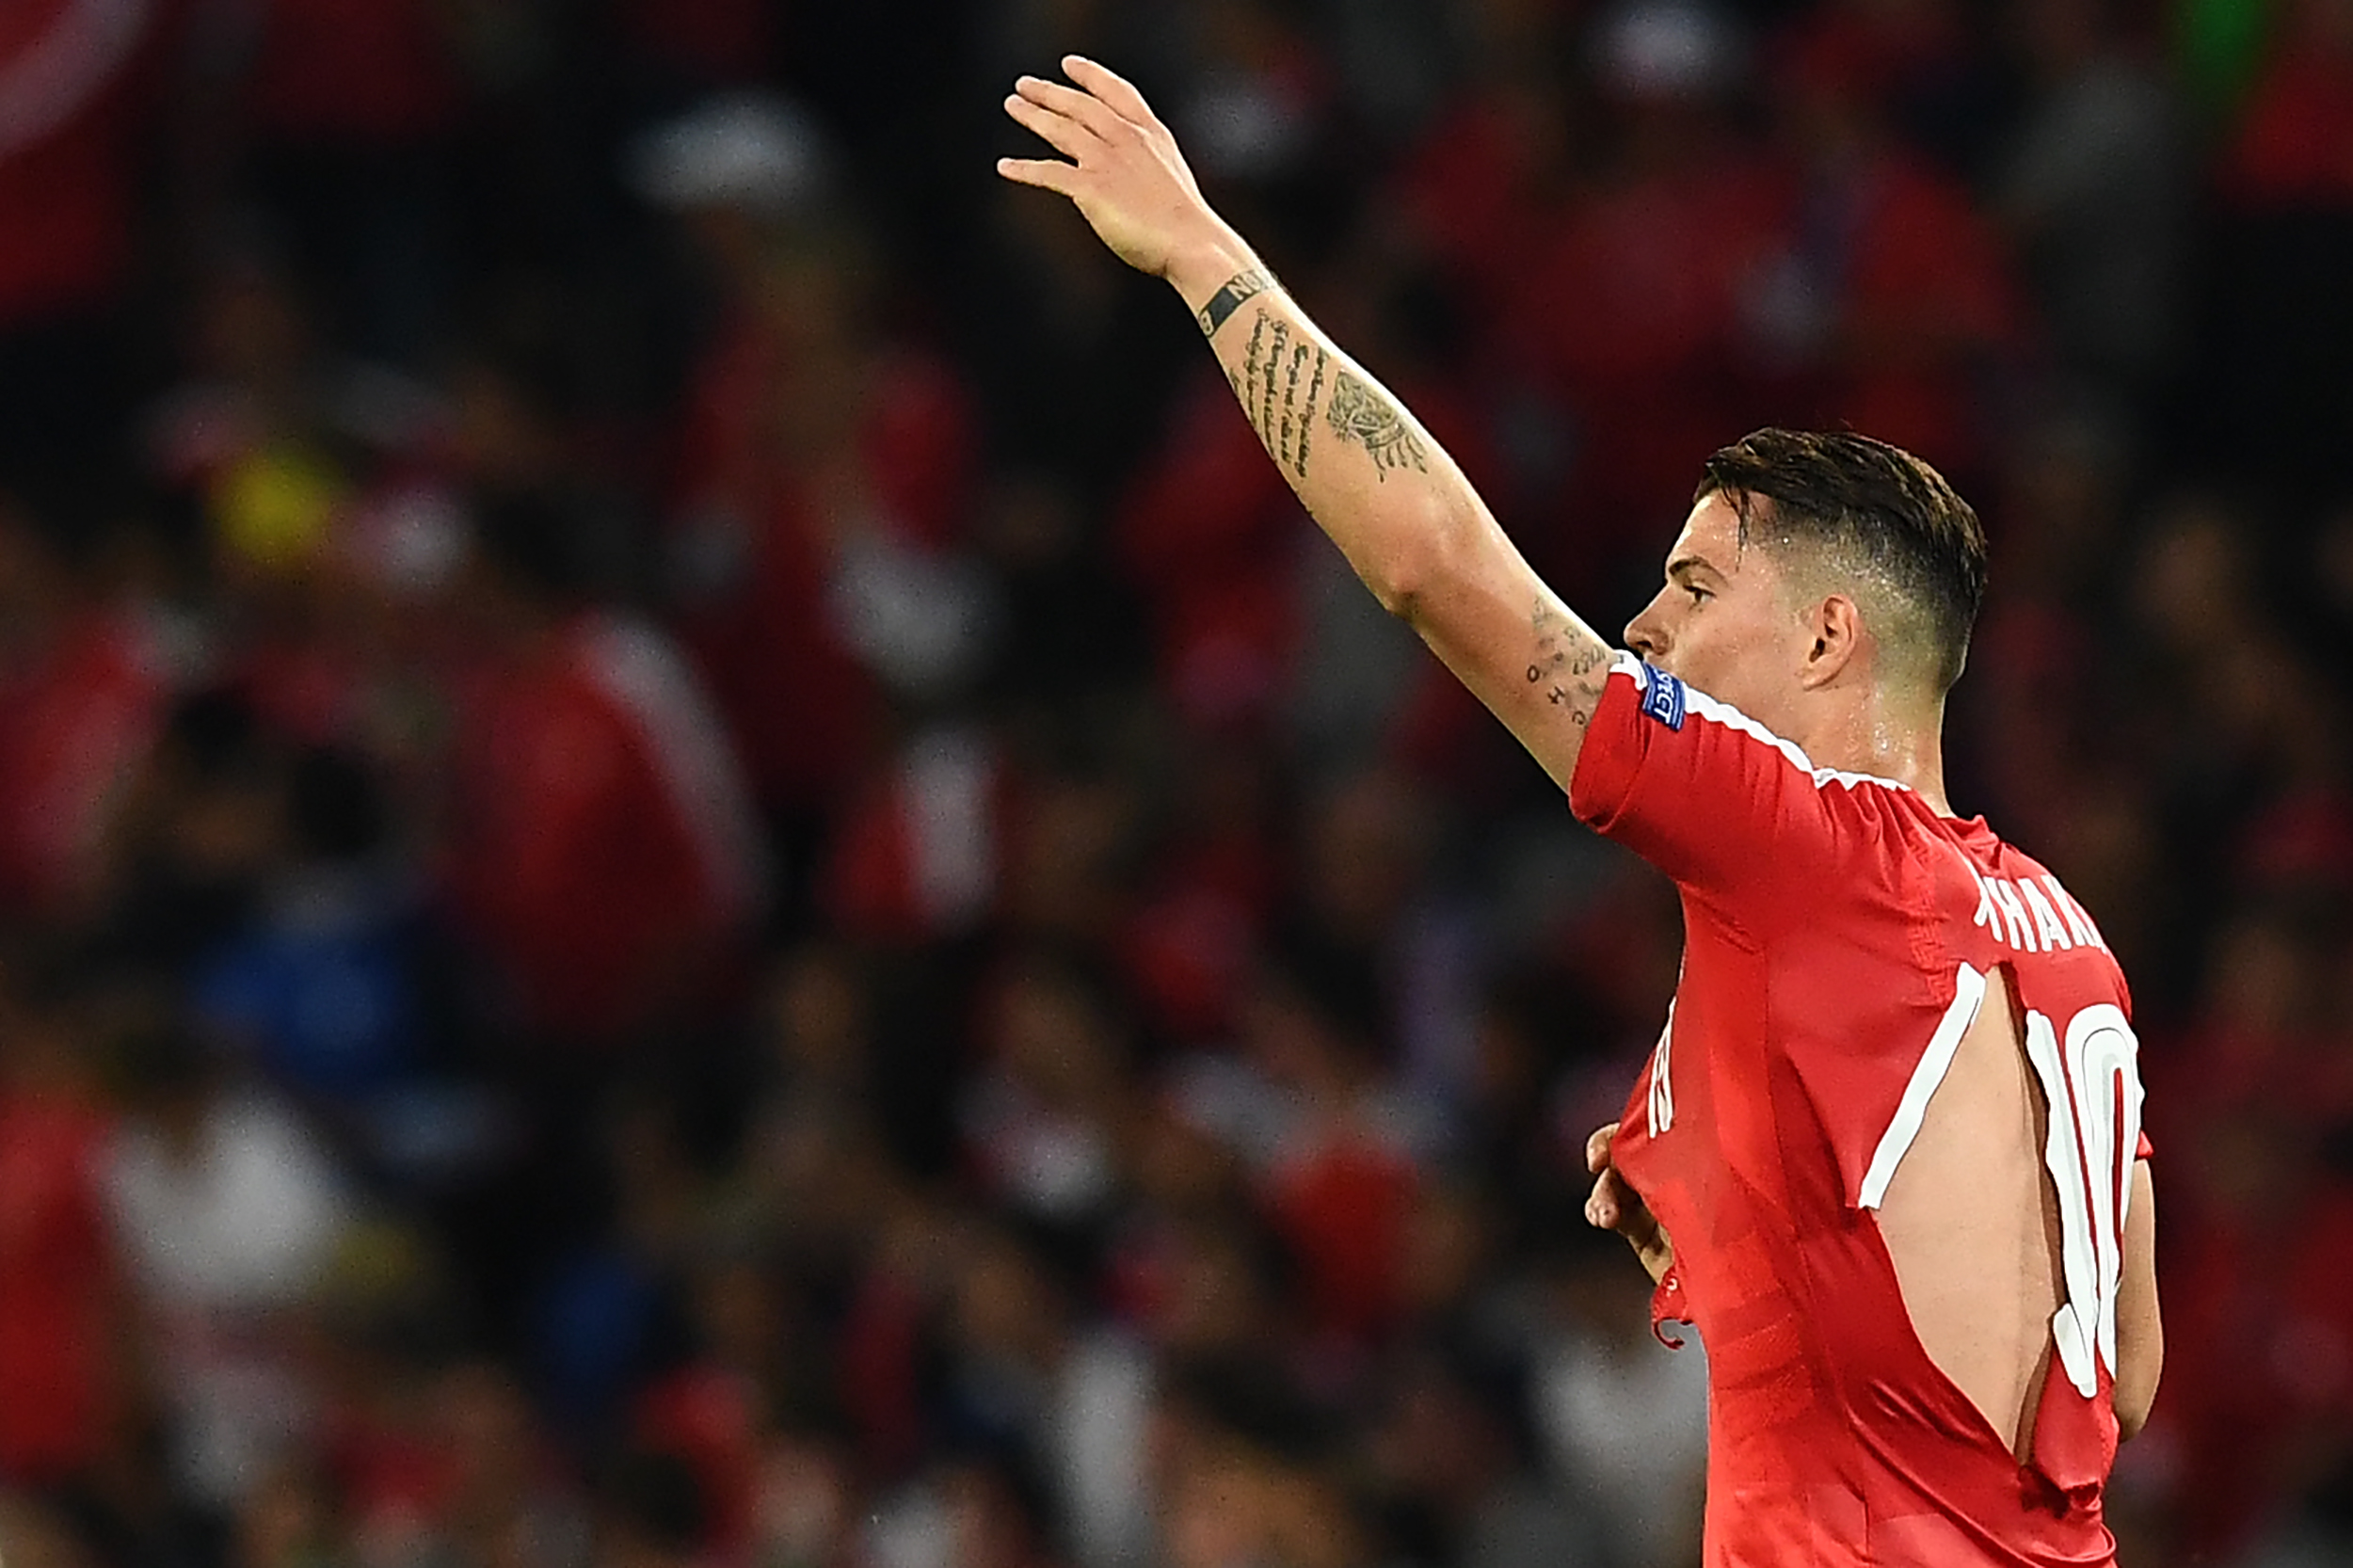 TOPSHOT - Switzerland's midfielder Granit Xhaka in a ripped shirt gestures during the Euro 2016 group A football match between Switzerland and France at the Pierre-Mauroy stadium in Lille on June 19, 2016. / AFP / FRANCK FIFE        (Photo credit should read FRANCK FIFE/AFP/Getty Images)